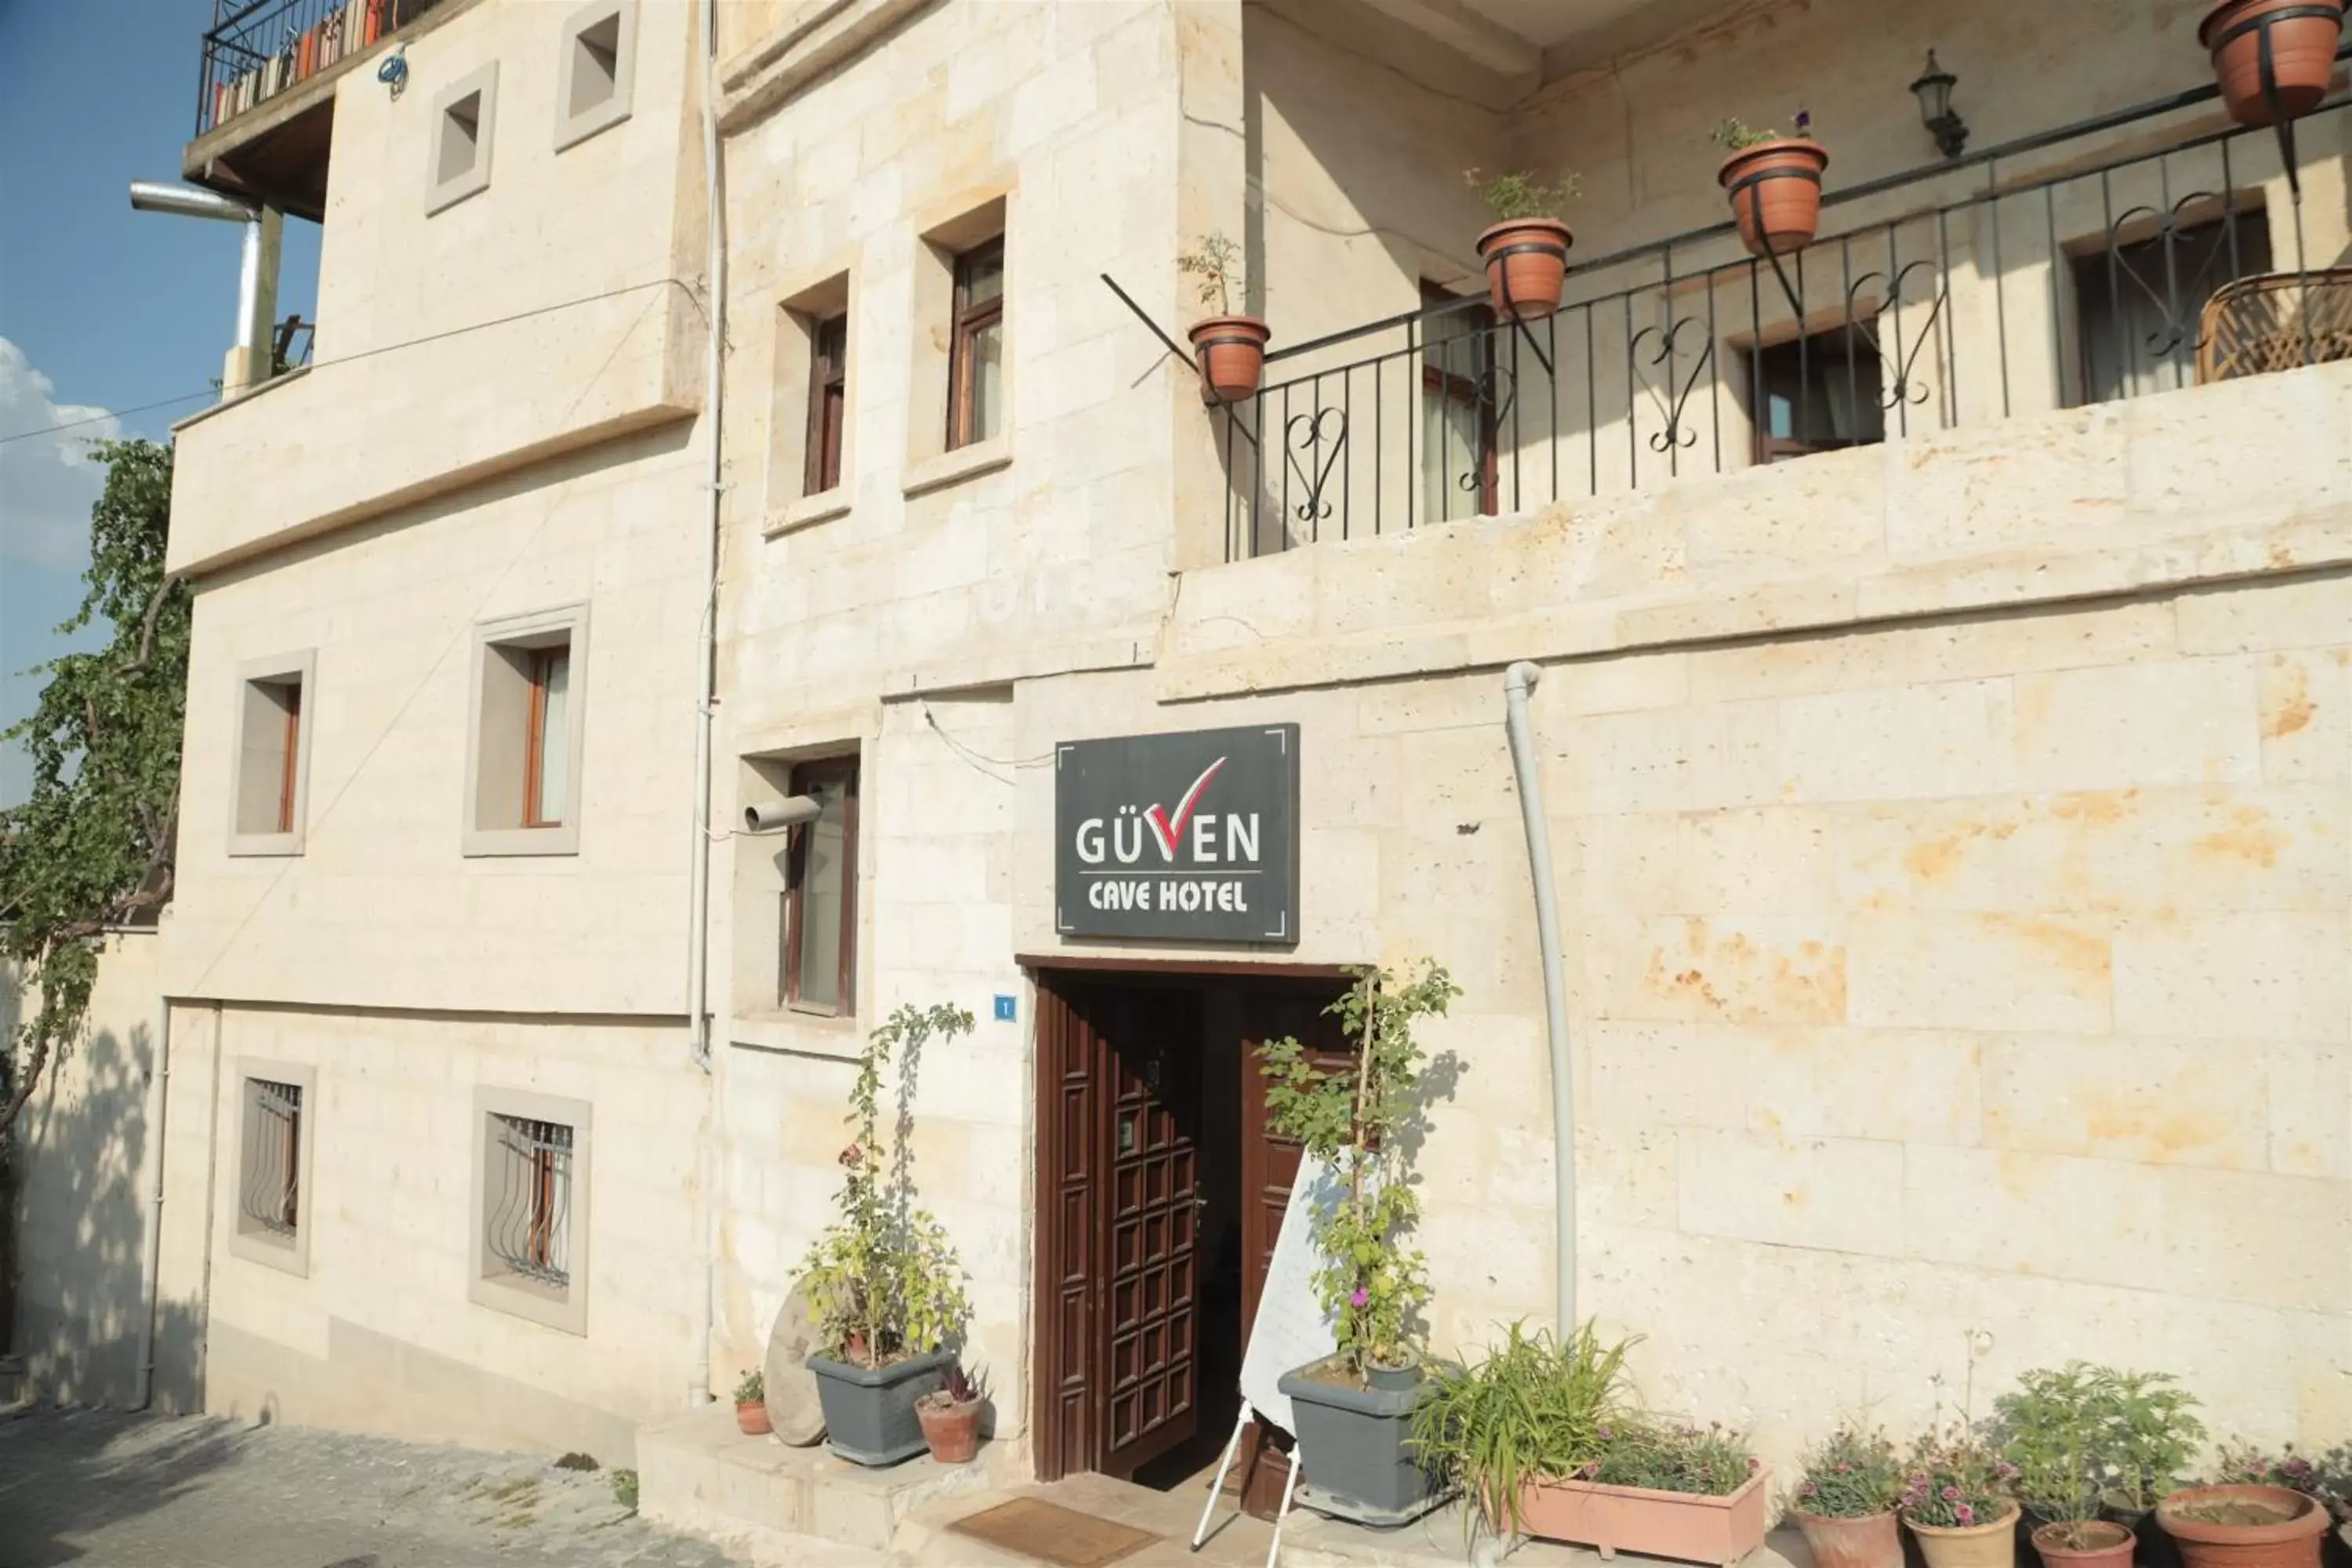 Property Building in Guven Cave Hotel